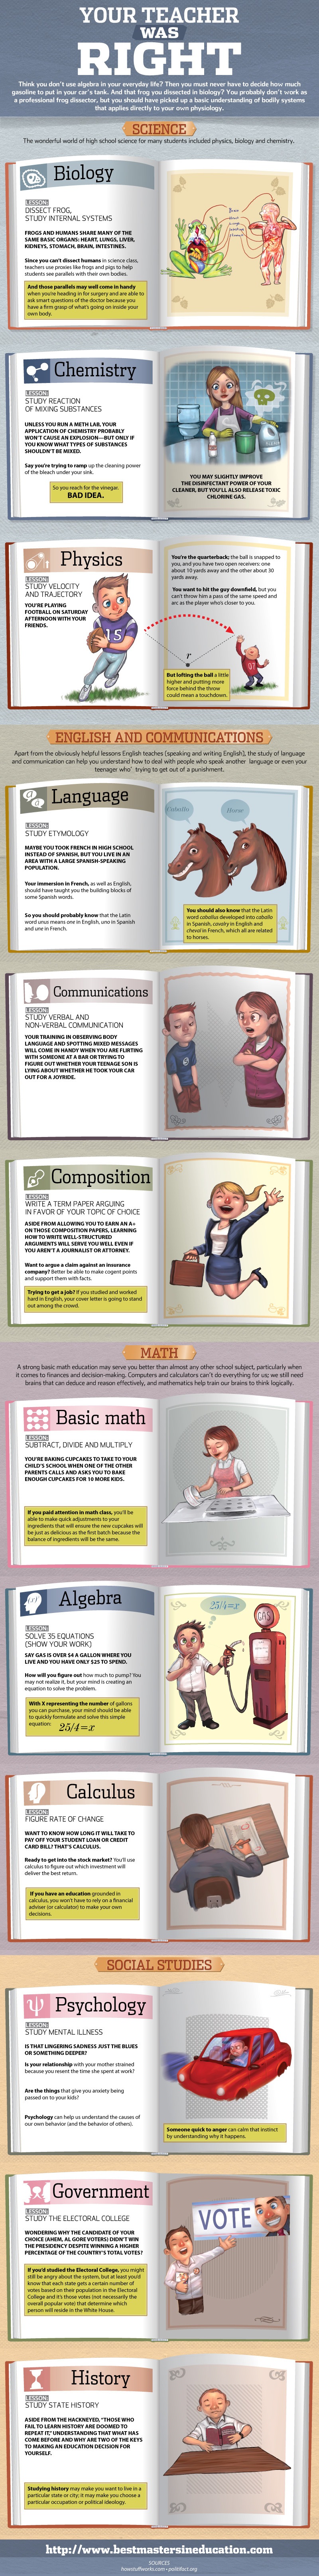 12 Reasons That Prove Your Teacher Was Right Infographic